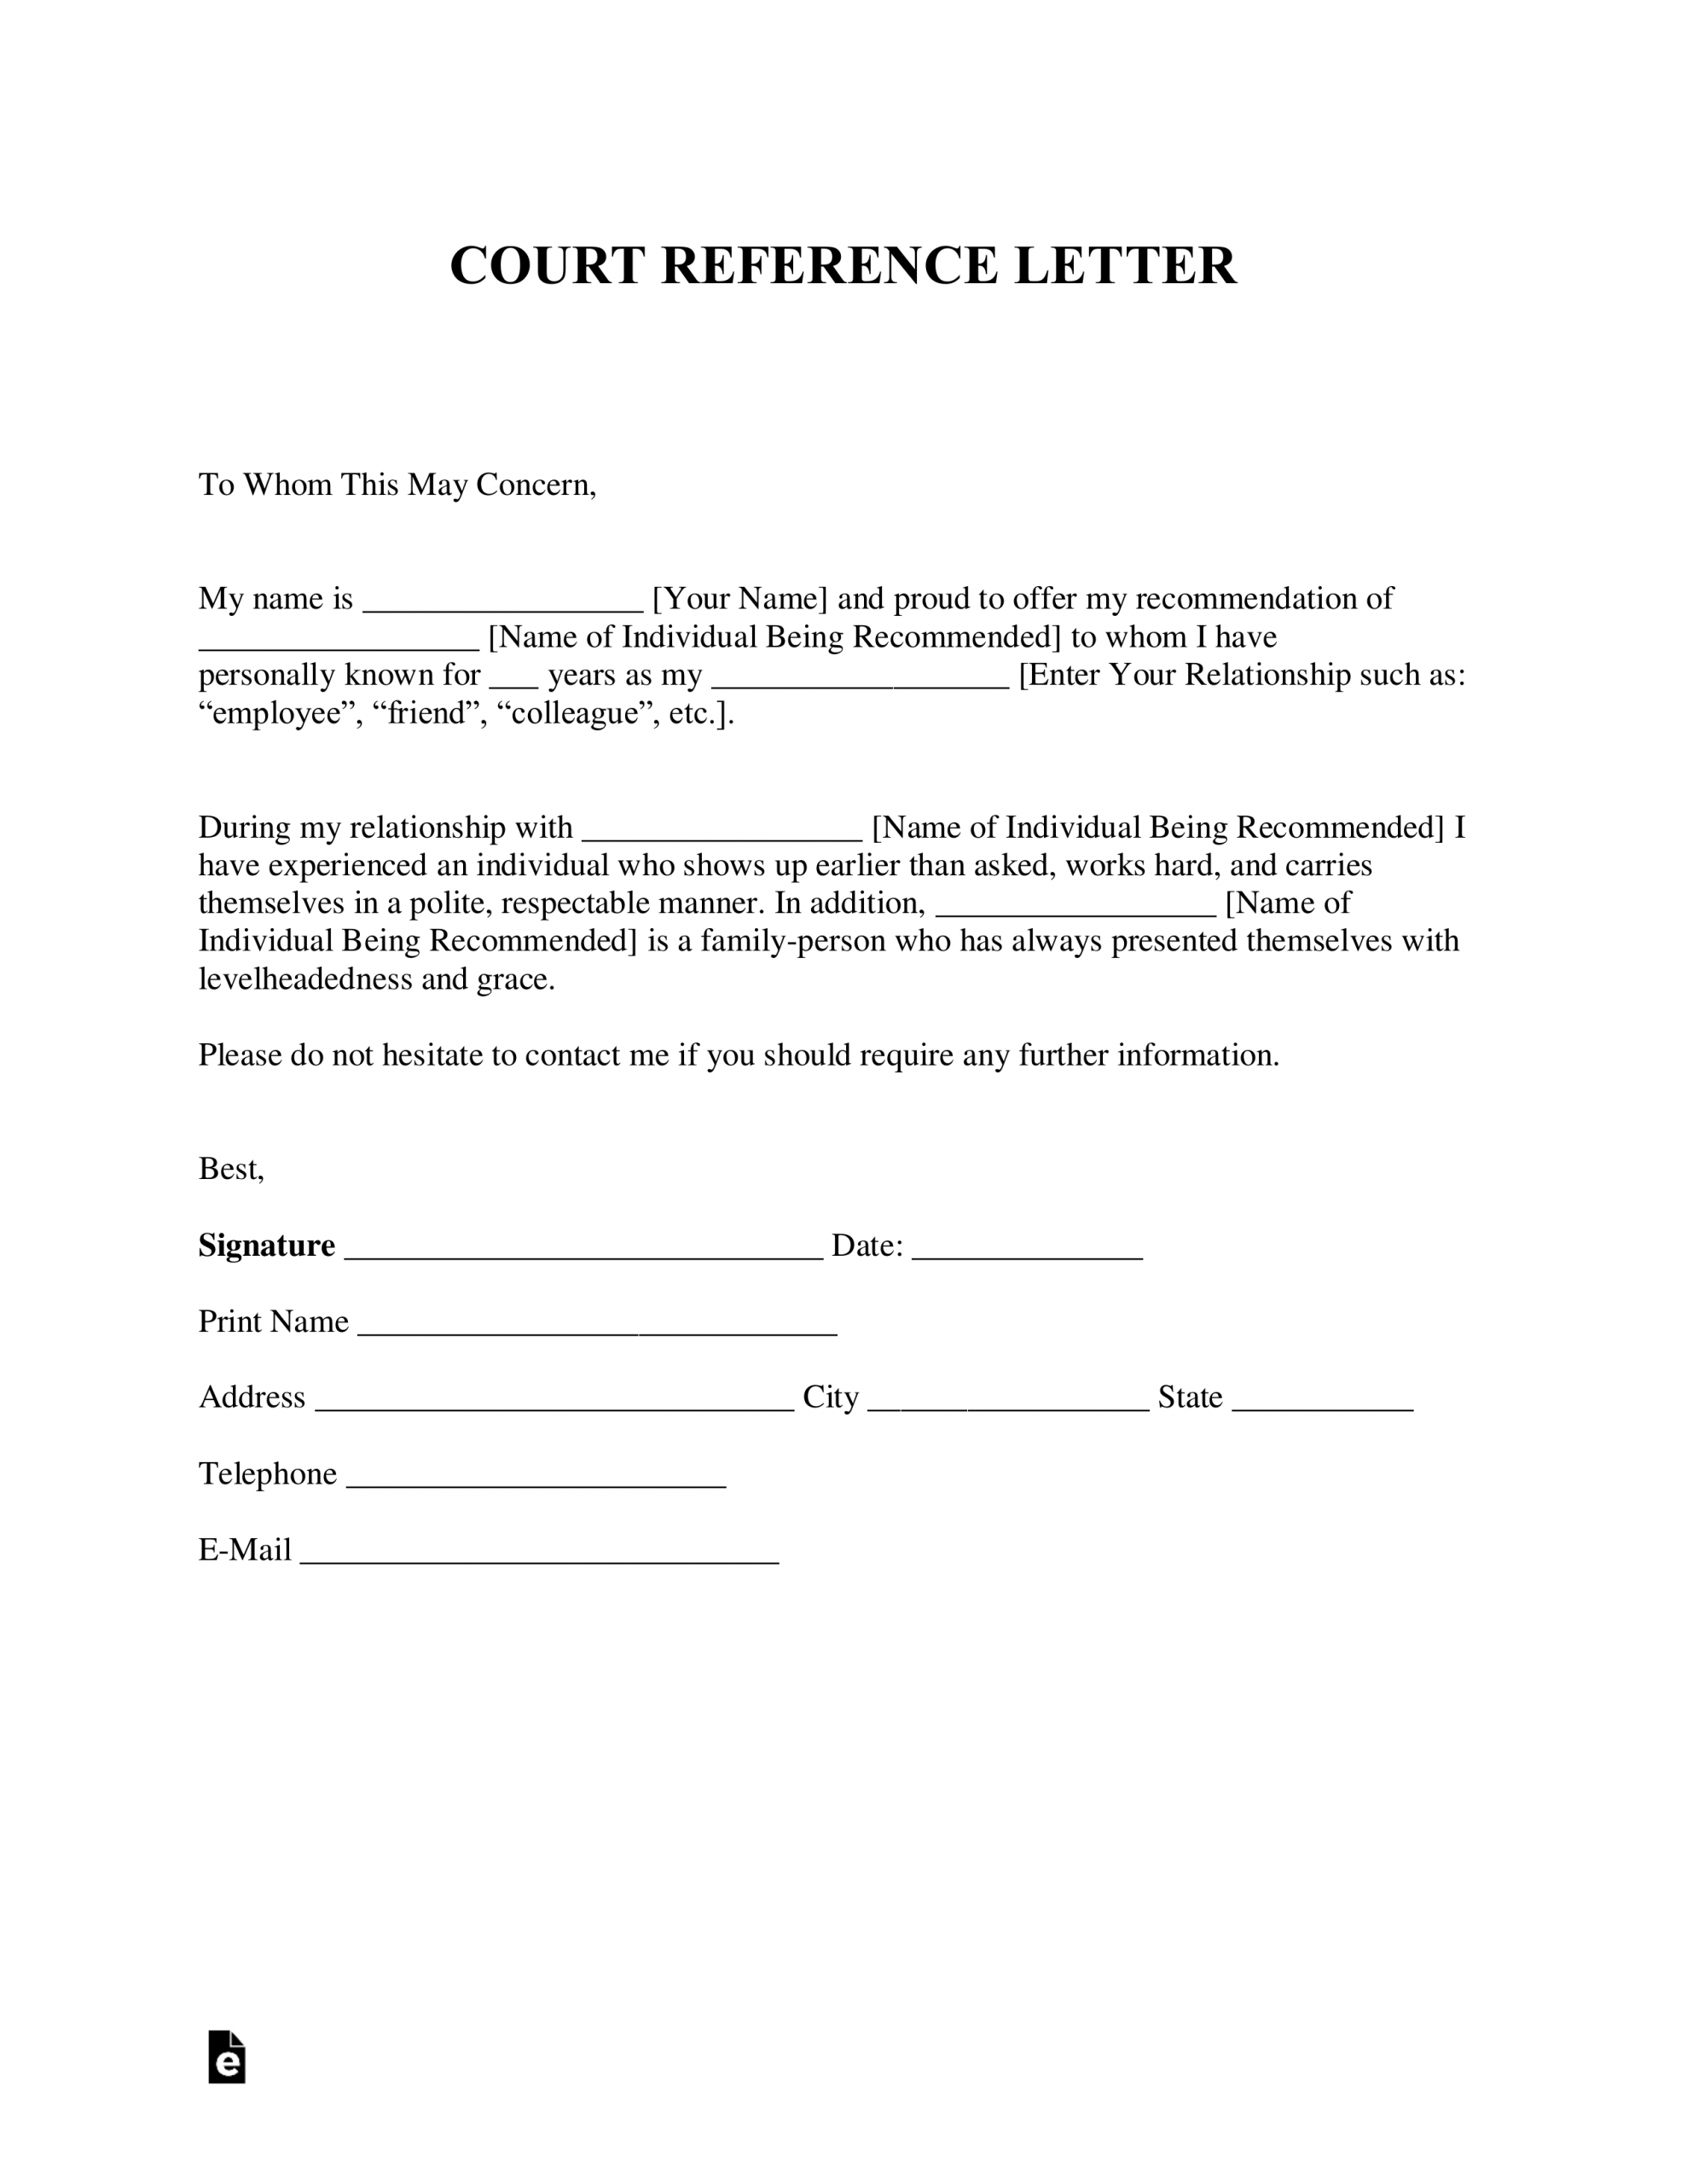 Free Character Reference Letter For Court Template inside dimensions 2550 X 3301